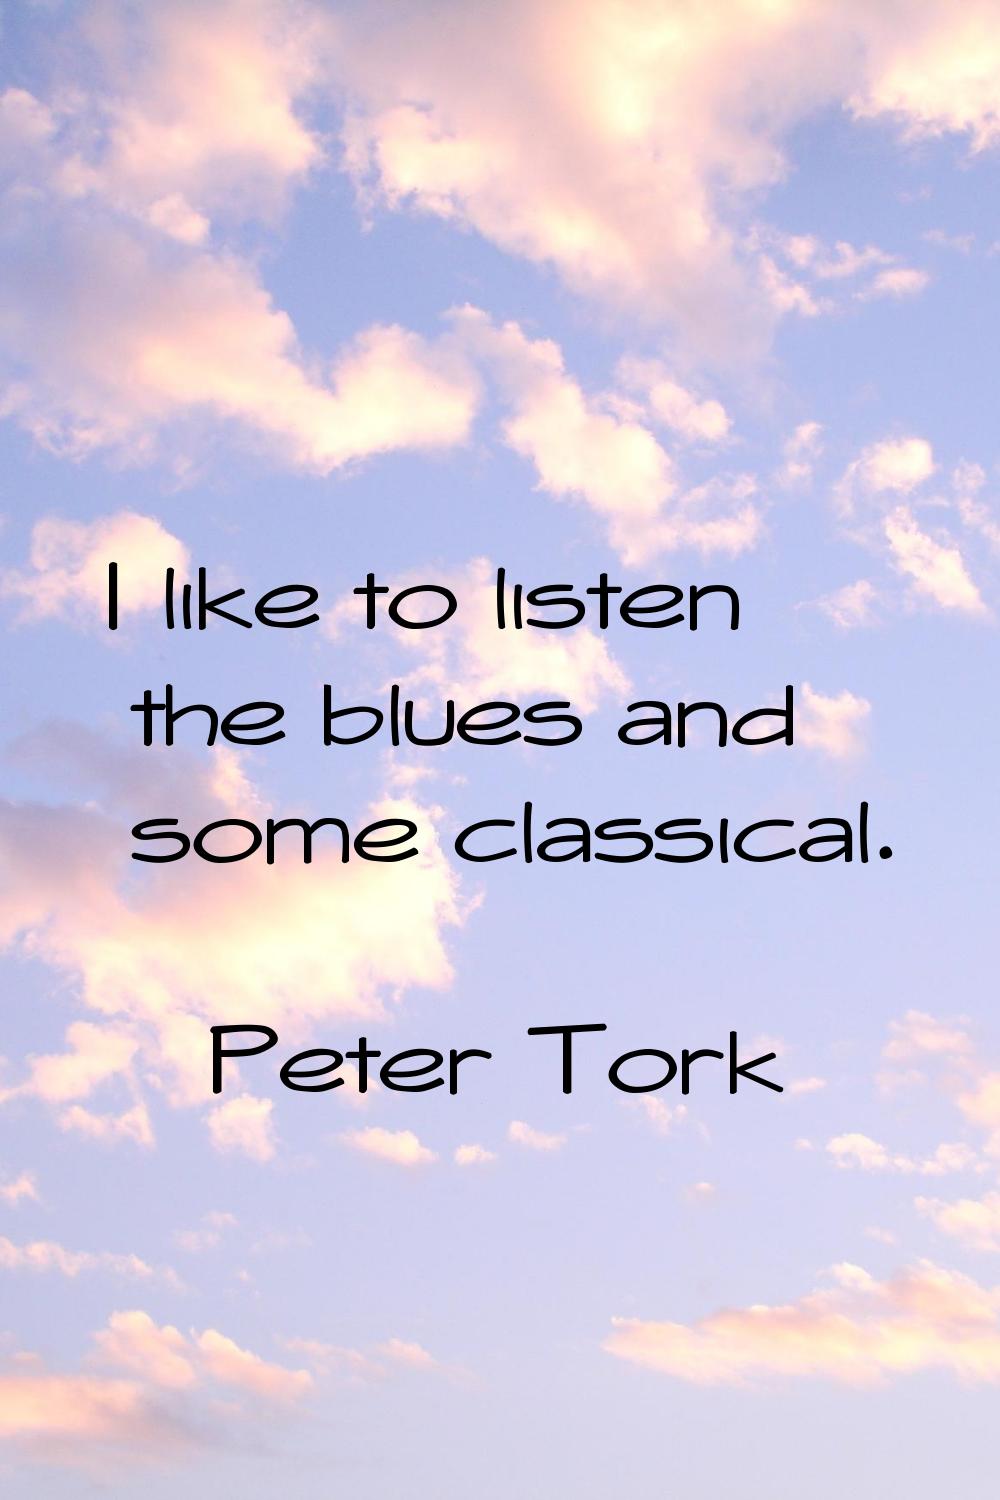 I like to listen the blues and some classical.